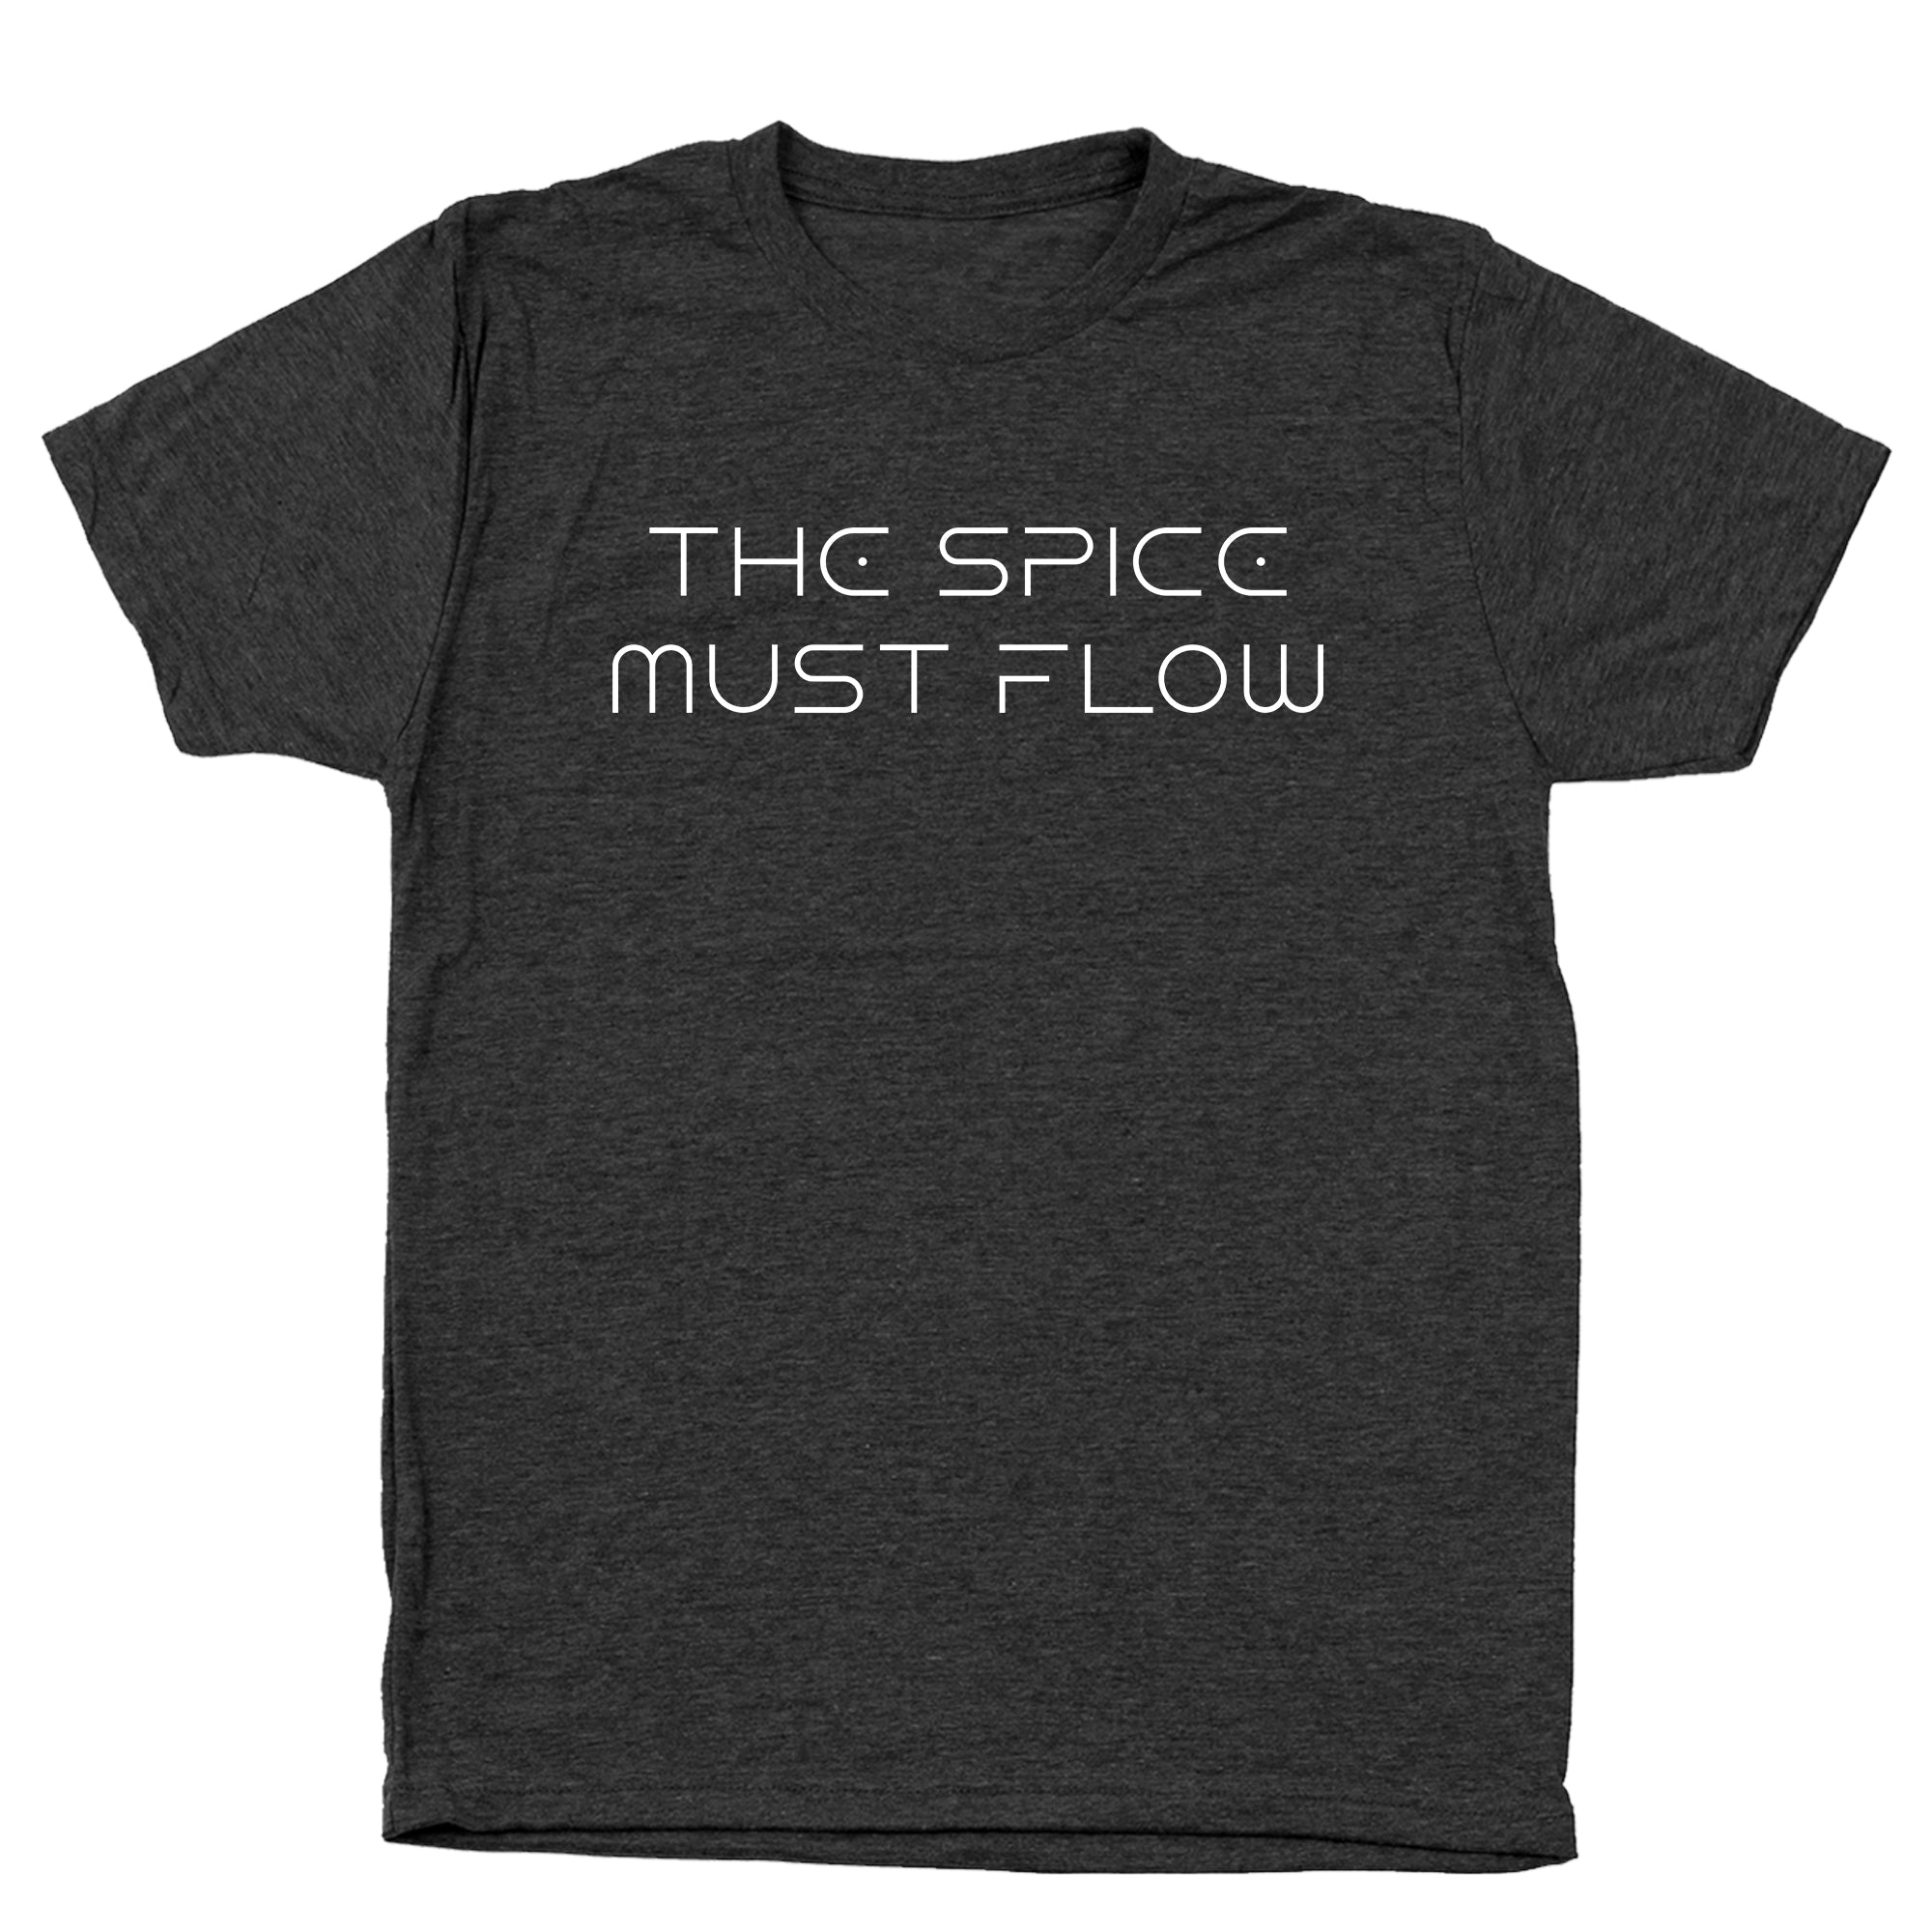 The Spice Must Flow Tshirt - Donkey Tees